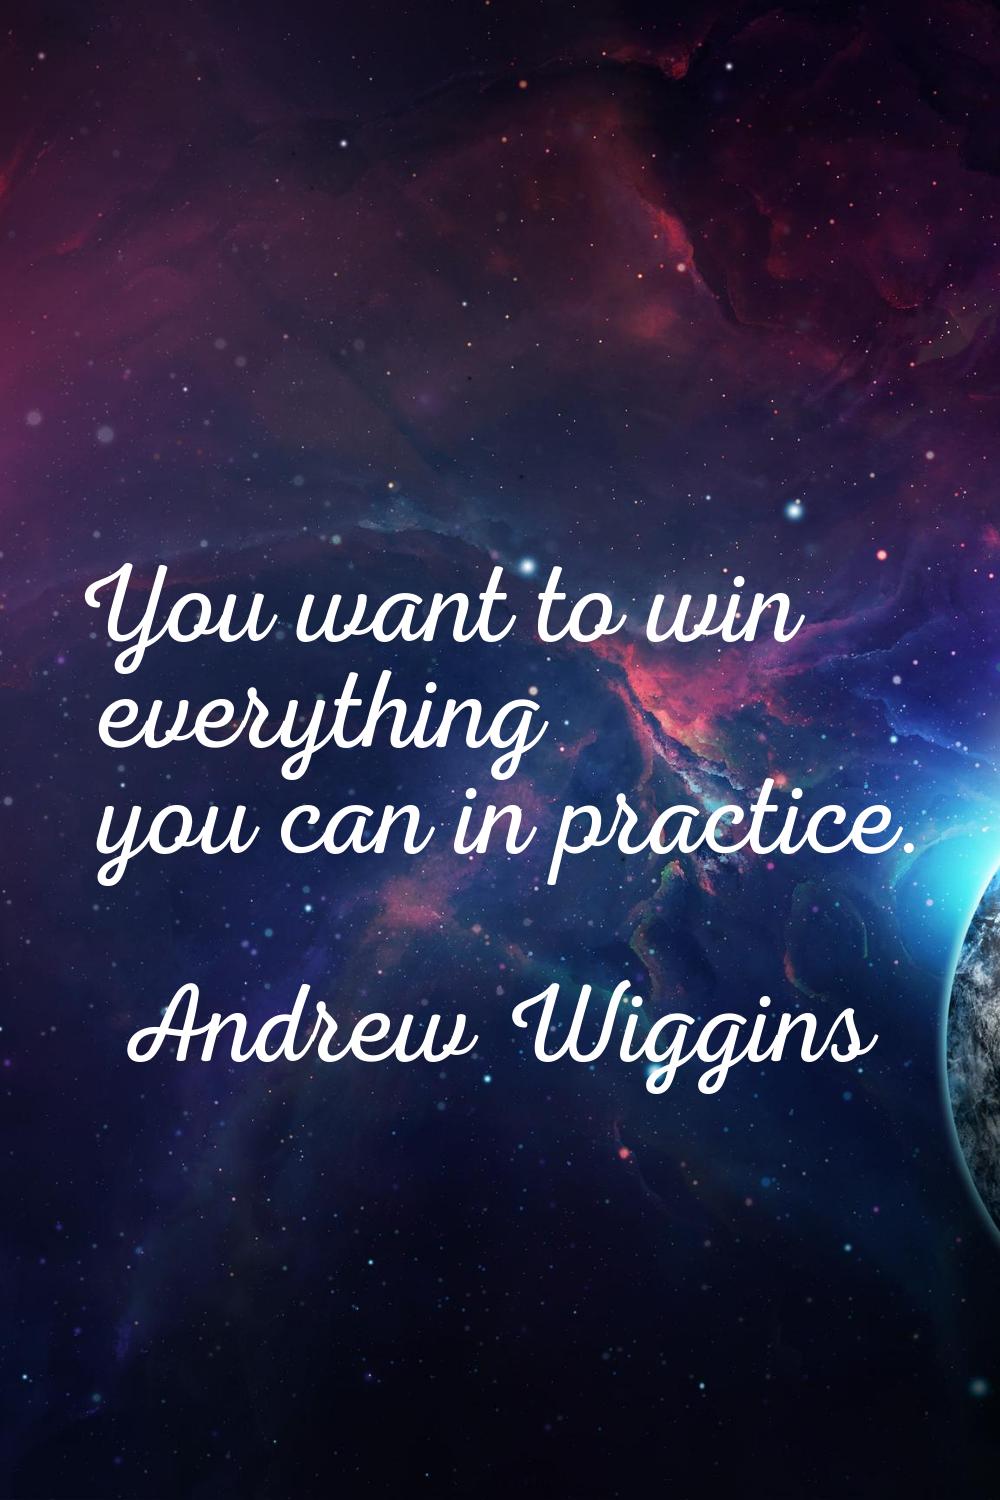 You want to win everything you can in practice.